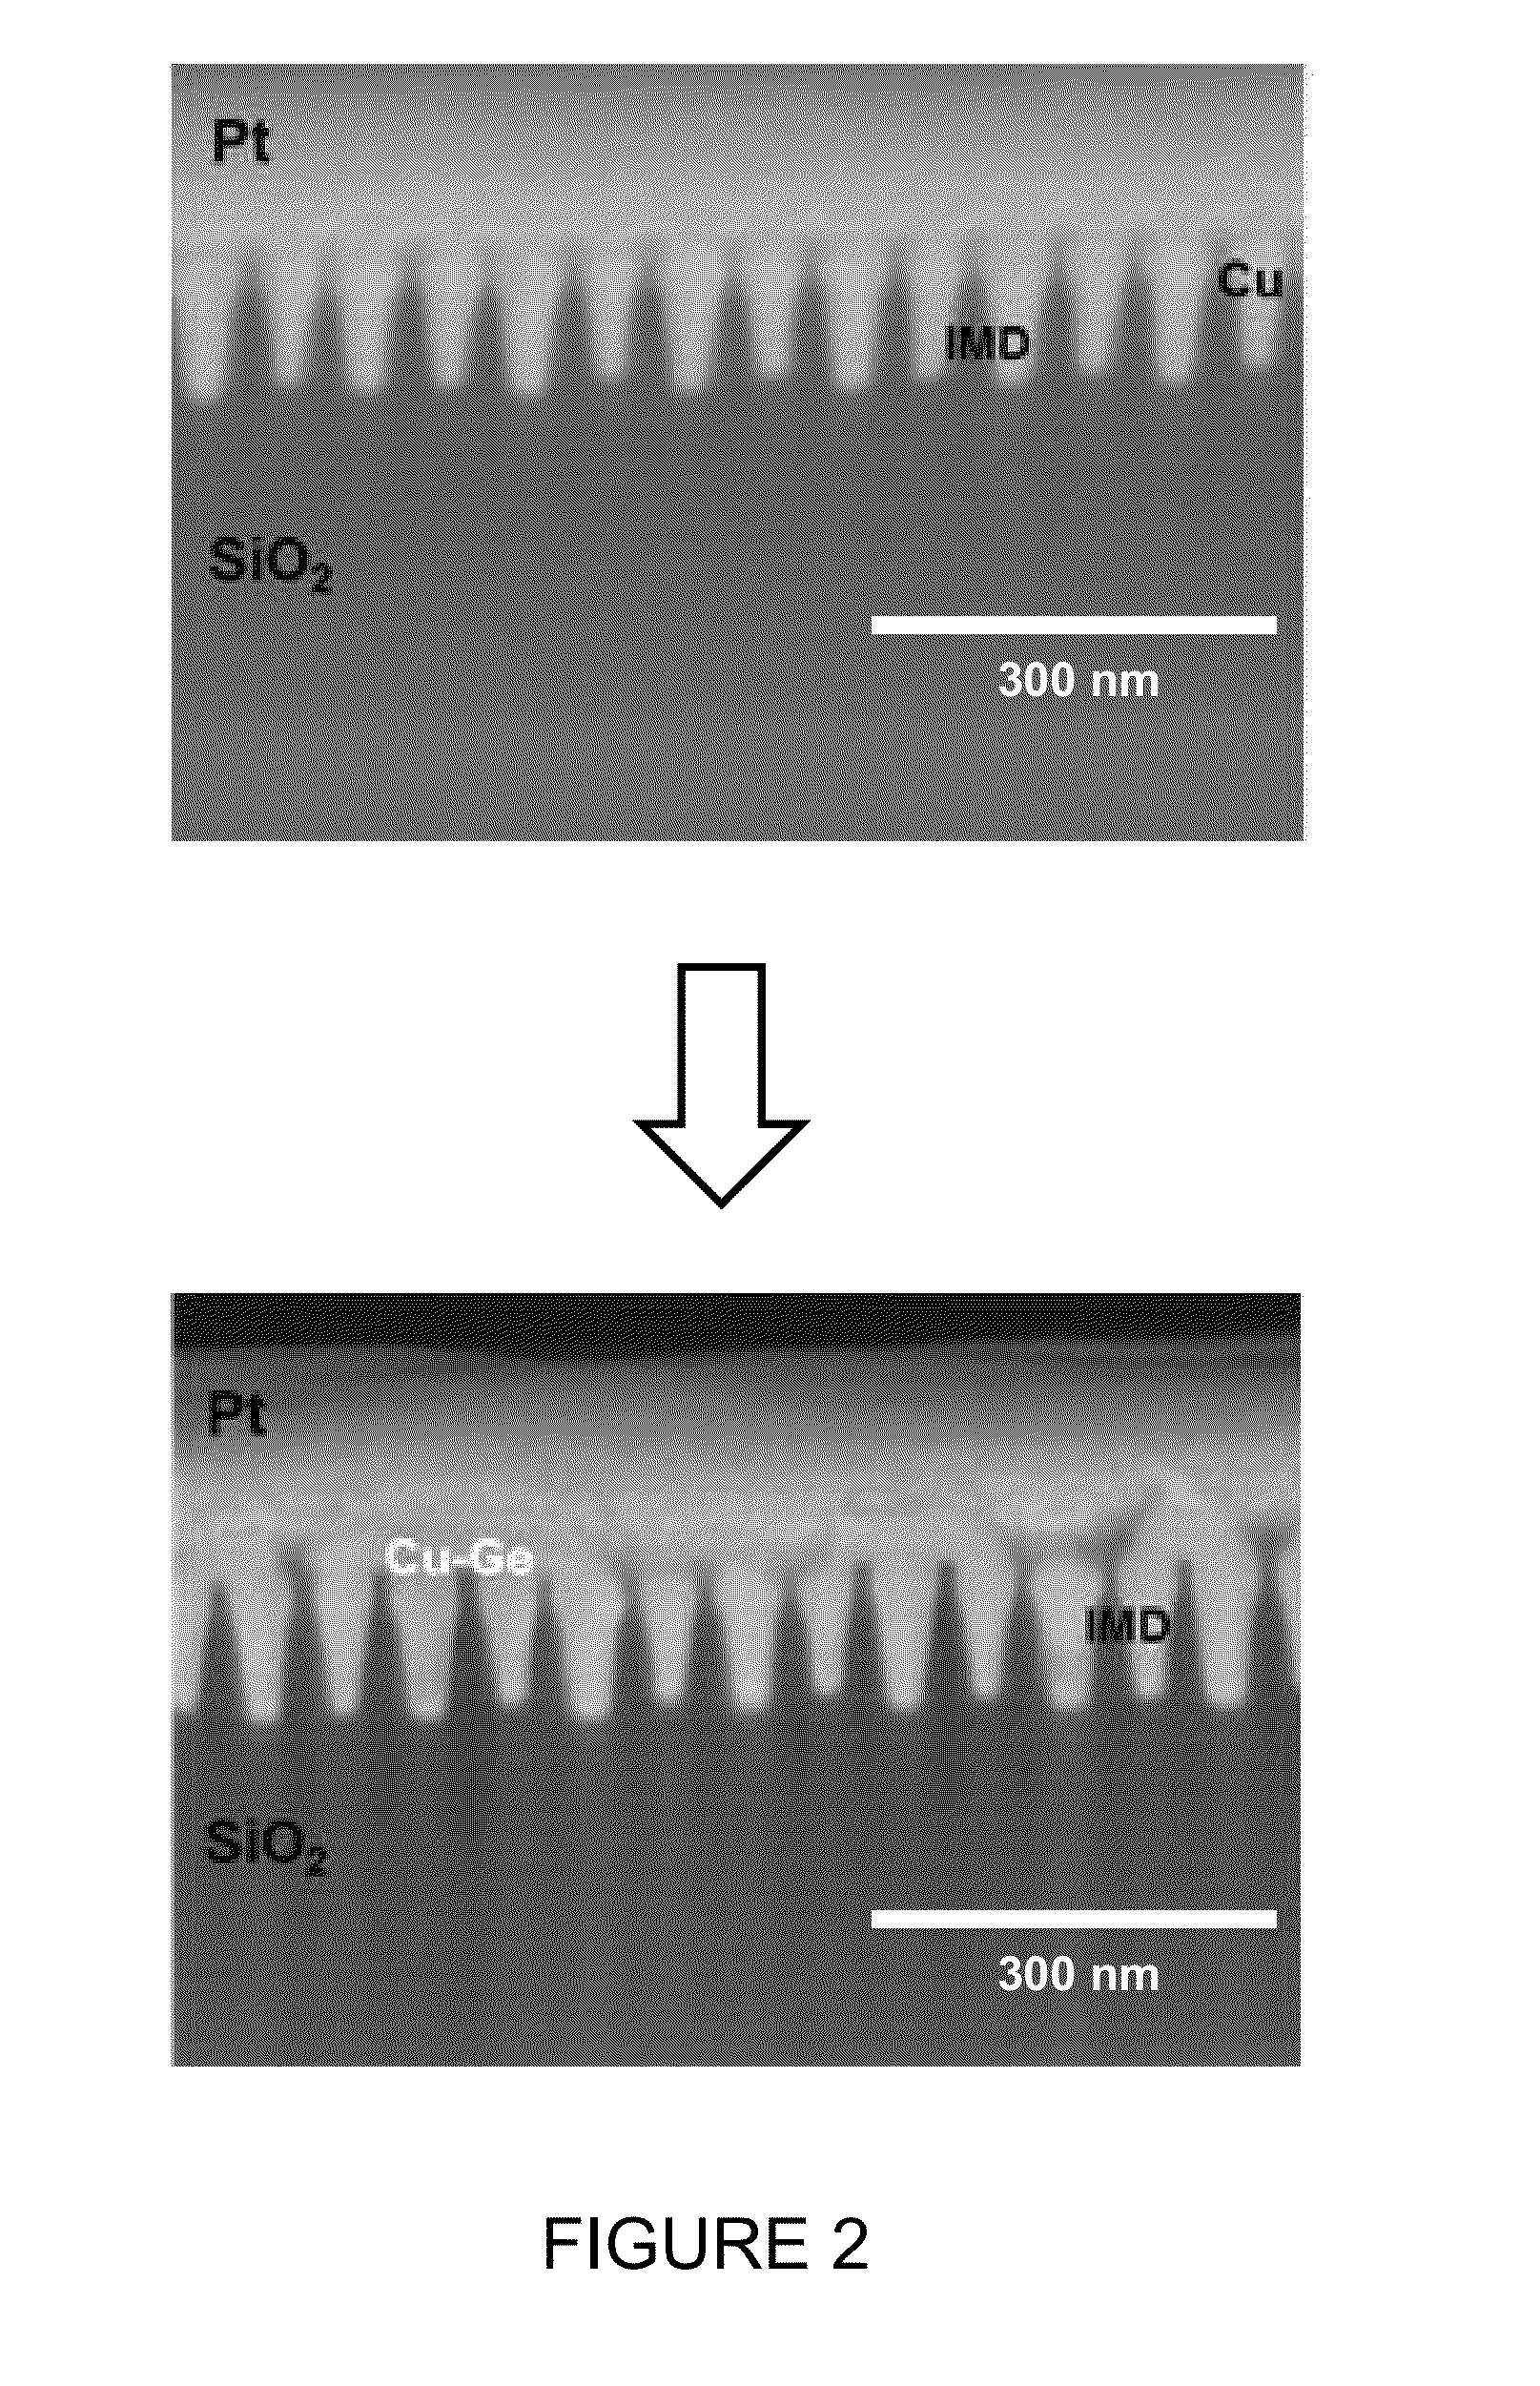 Method for Manufacturing Germanide Interconnect Structures and Corresponding Interconnect Structures